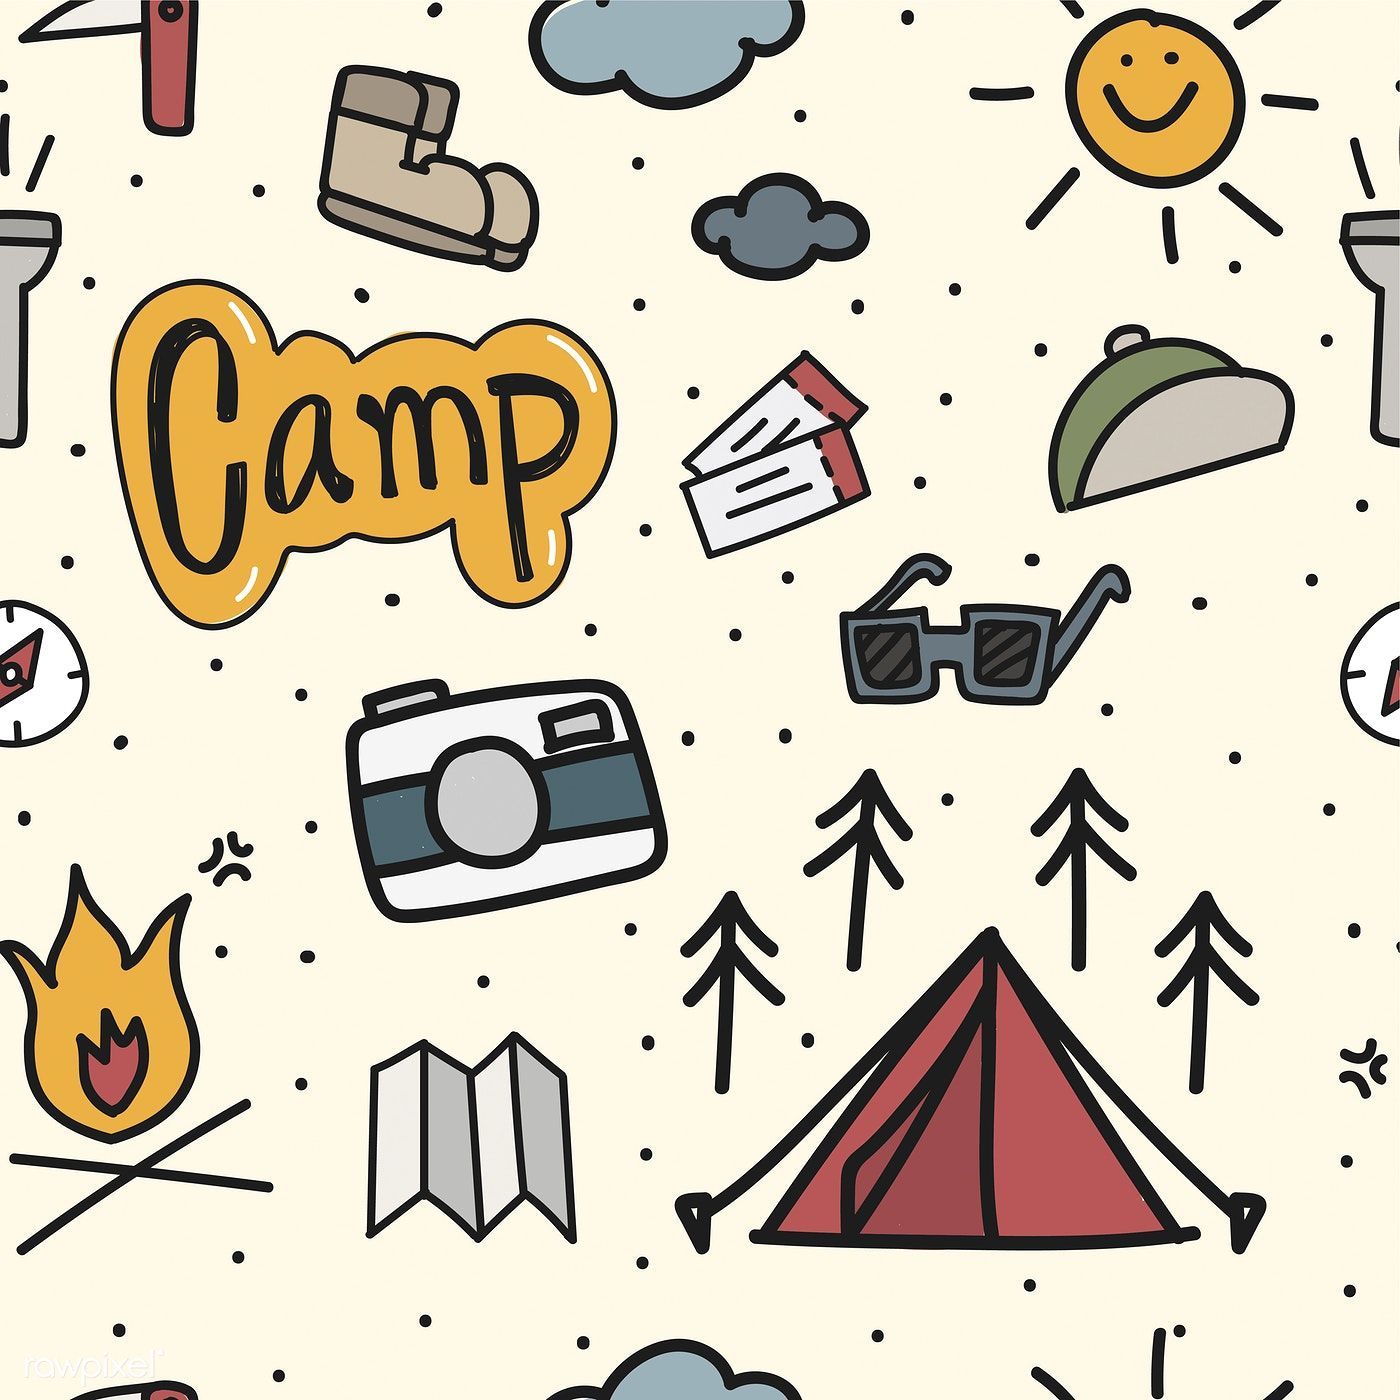 A pattern of camping gear and equipment. - Camping